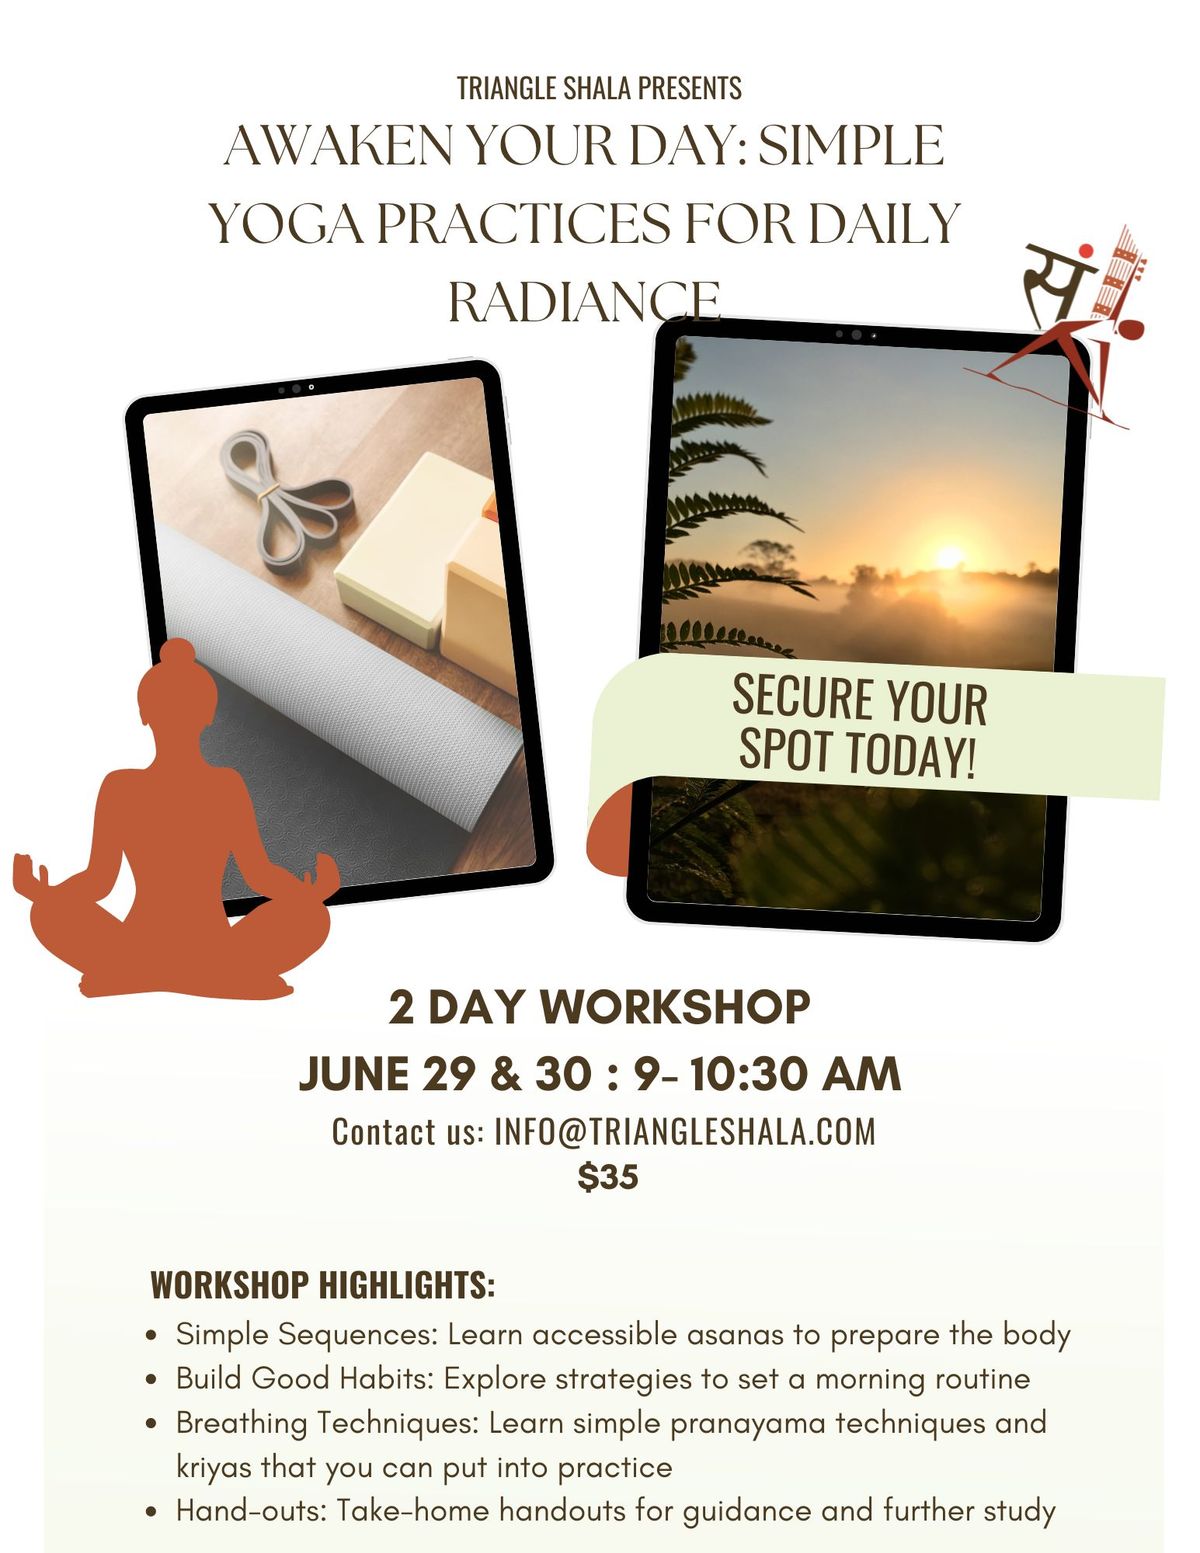 Awaken your Day: 2-Day Workshop to Build a Simple Daily Yoga Practice